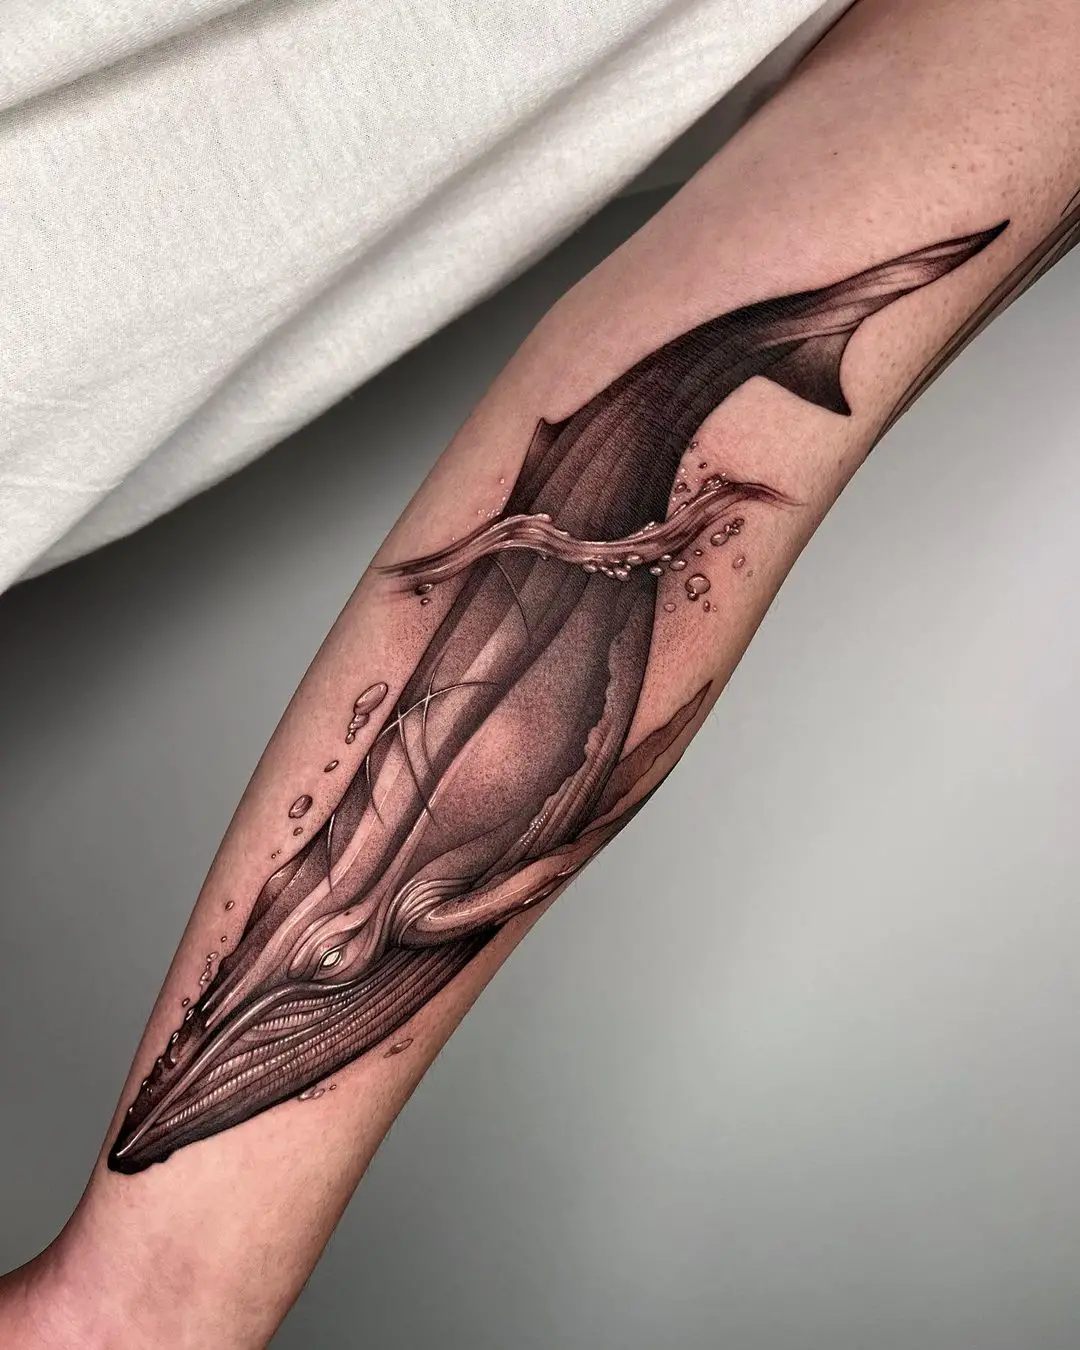 Whale tattoo design by sudal blk